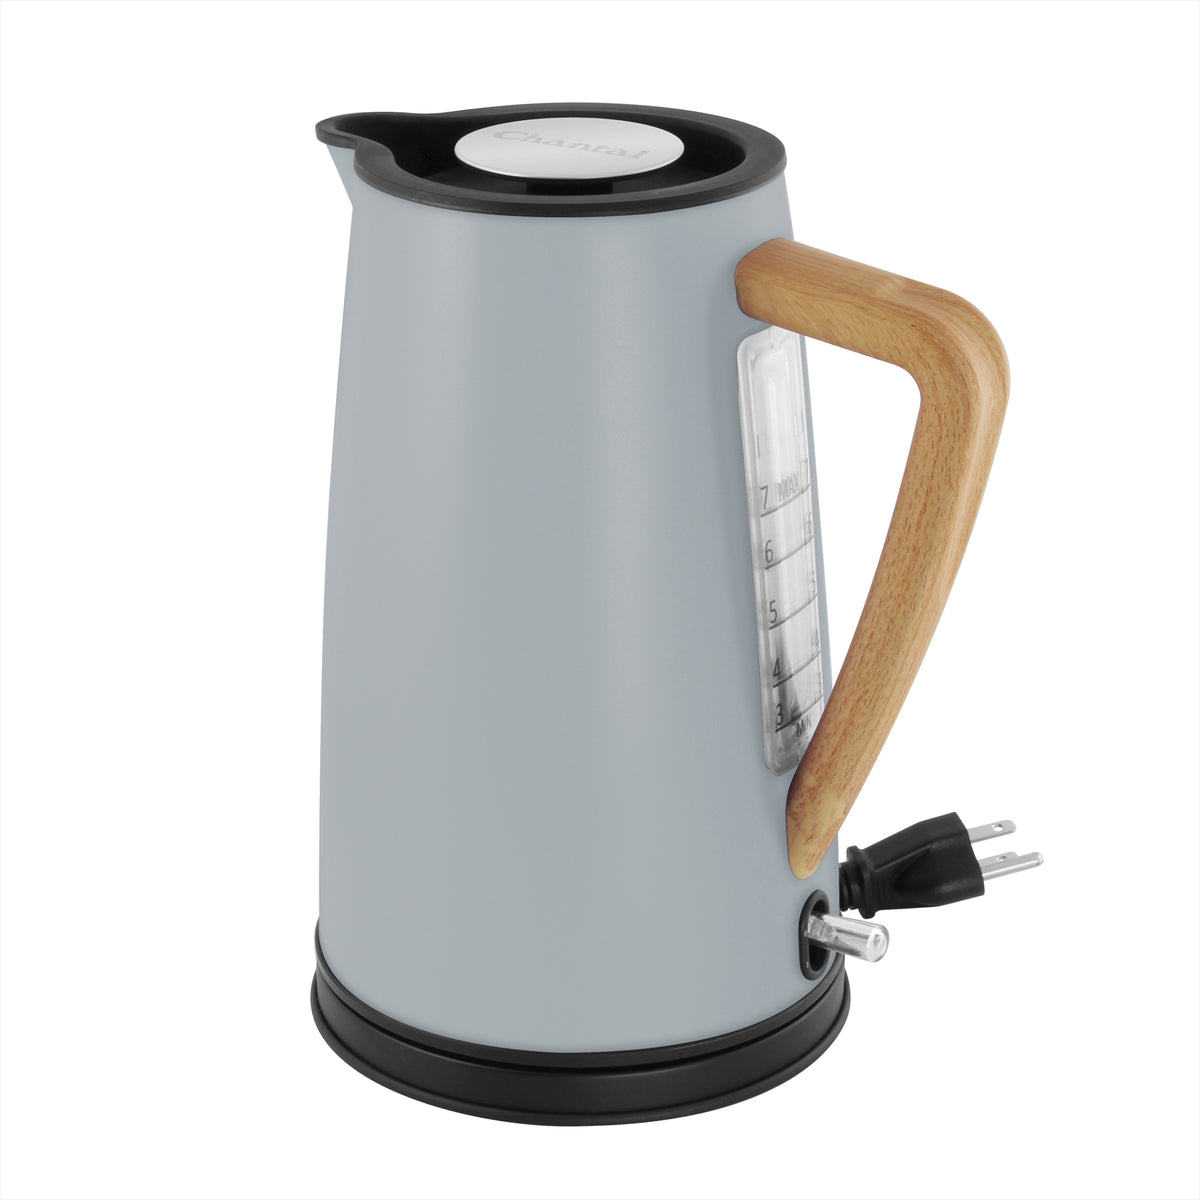 Electric kettle w/ a fully stainless steel interior on limited